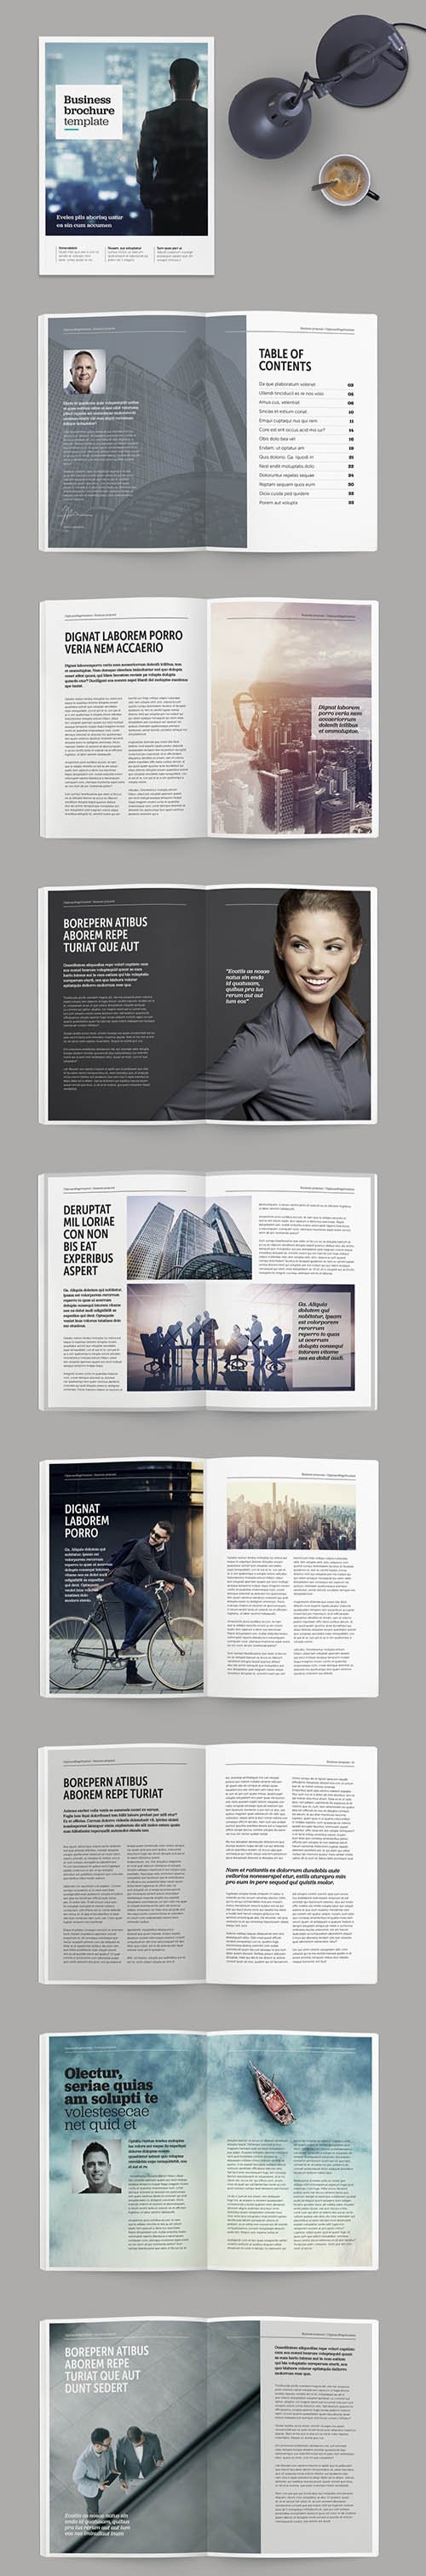 Brochure/Magazine Layout with Bold Title Treatments